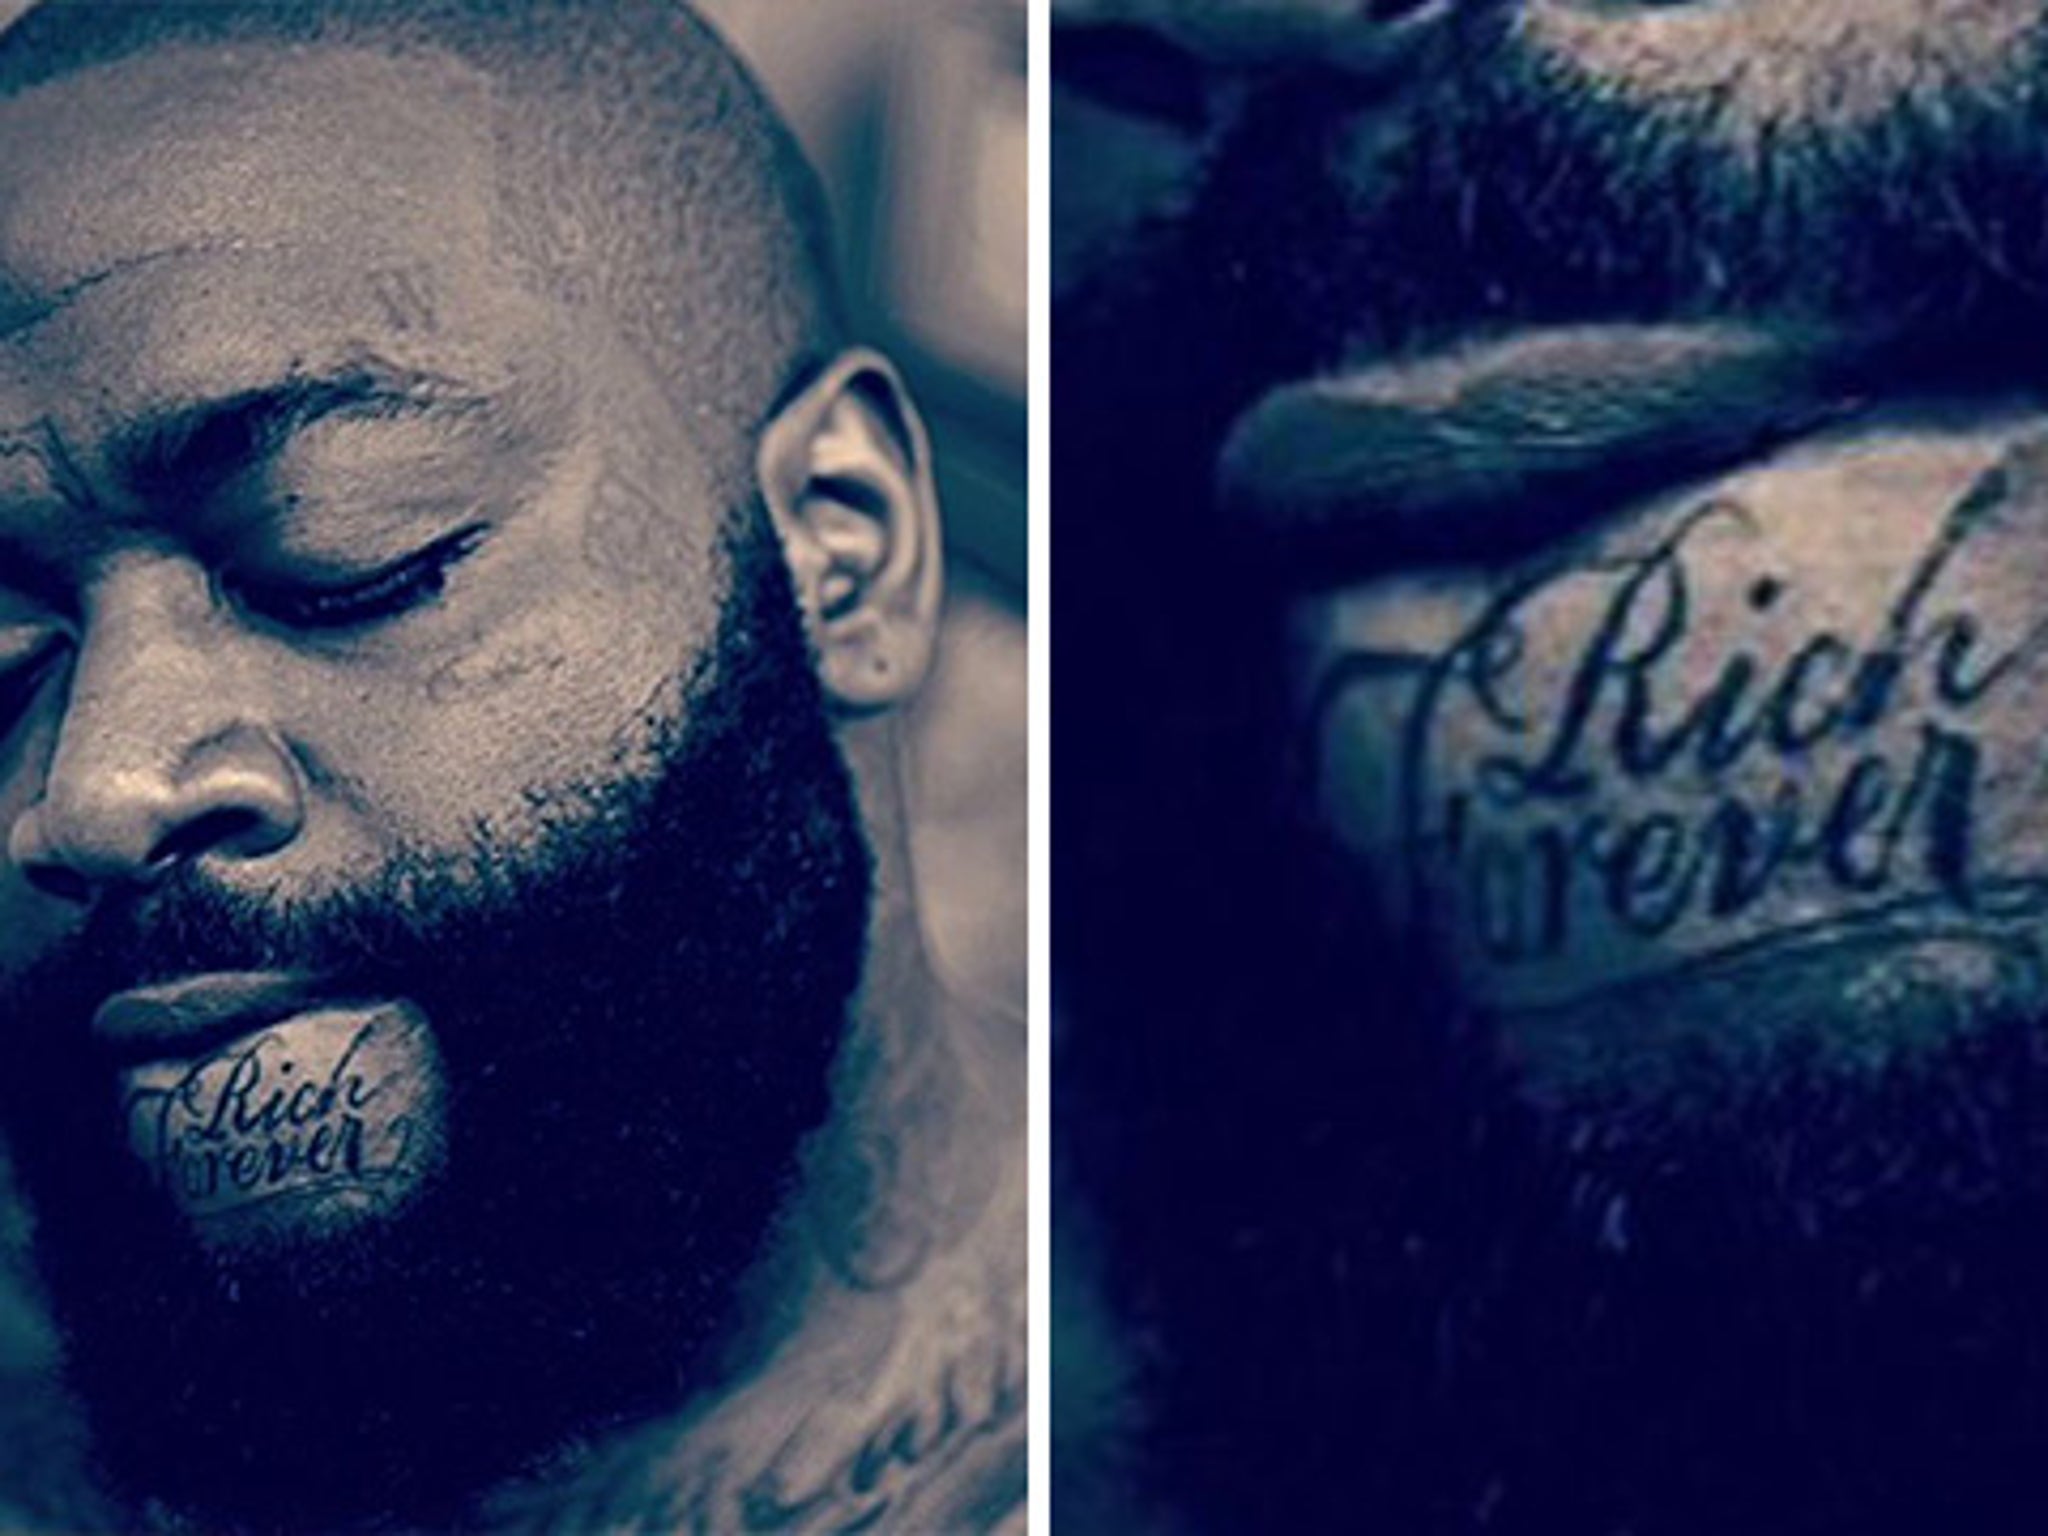 Rick Ross unveils new 'Rich Forever' chin tattoo in Instagram snap